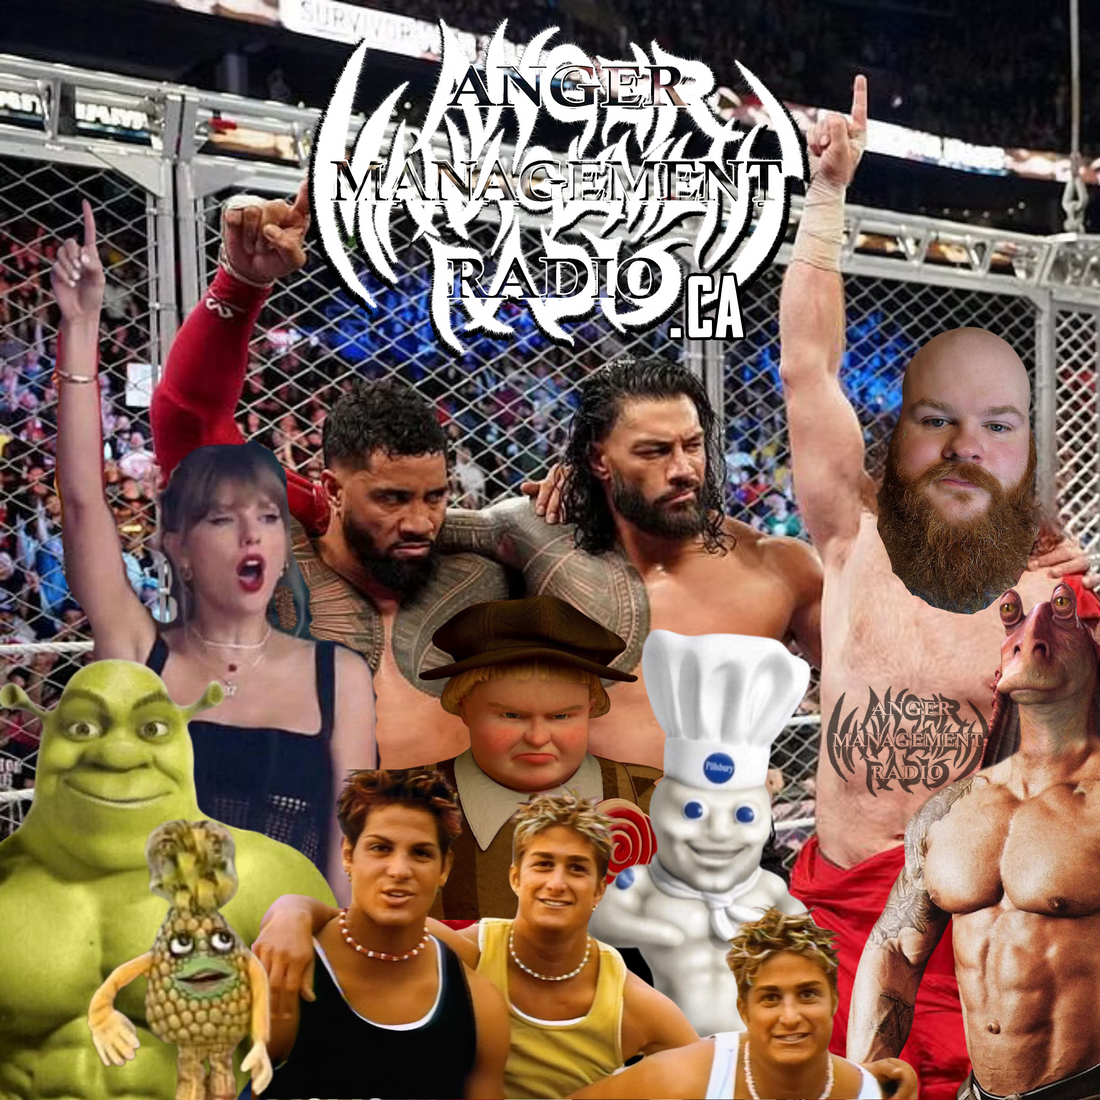 Gruesome Geddes with Canadian Icons and the Anger Management Radio logo